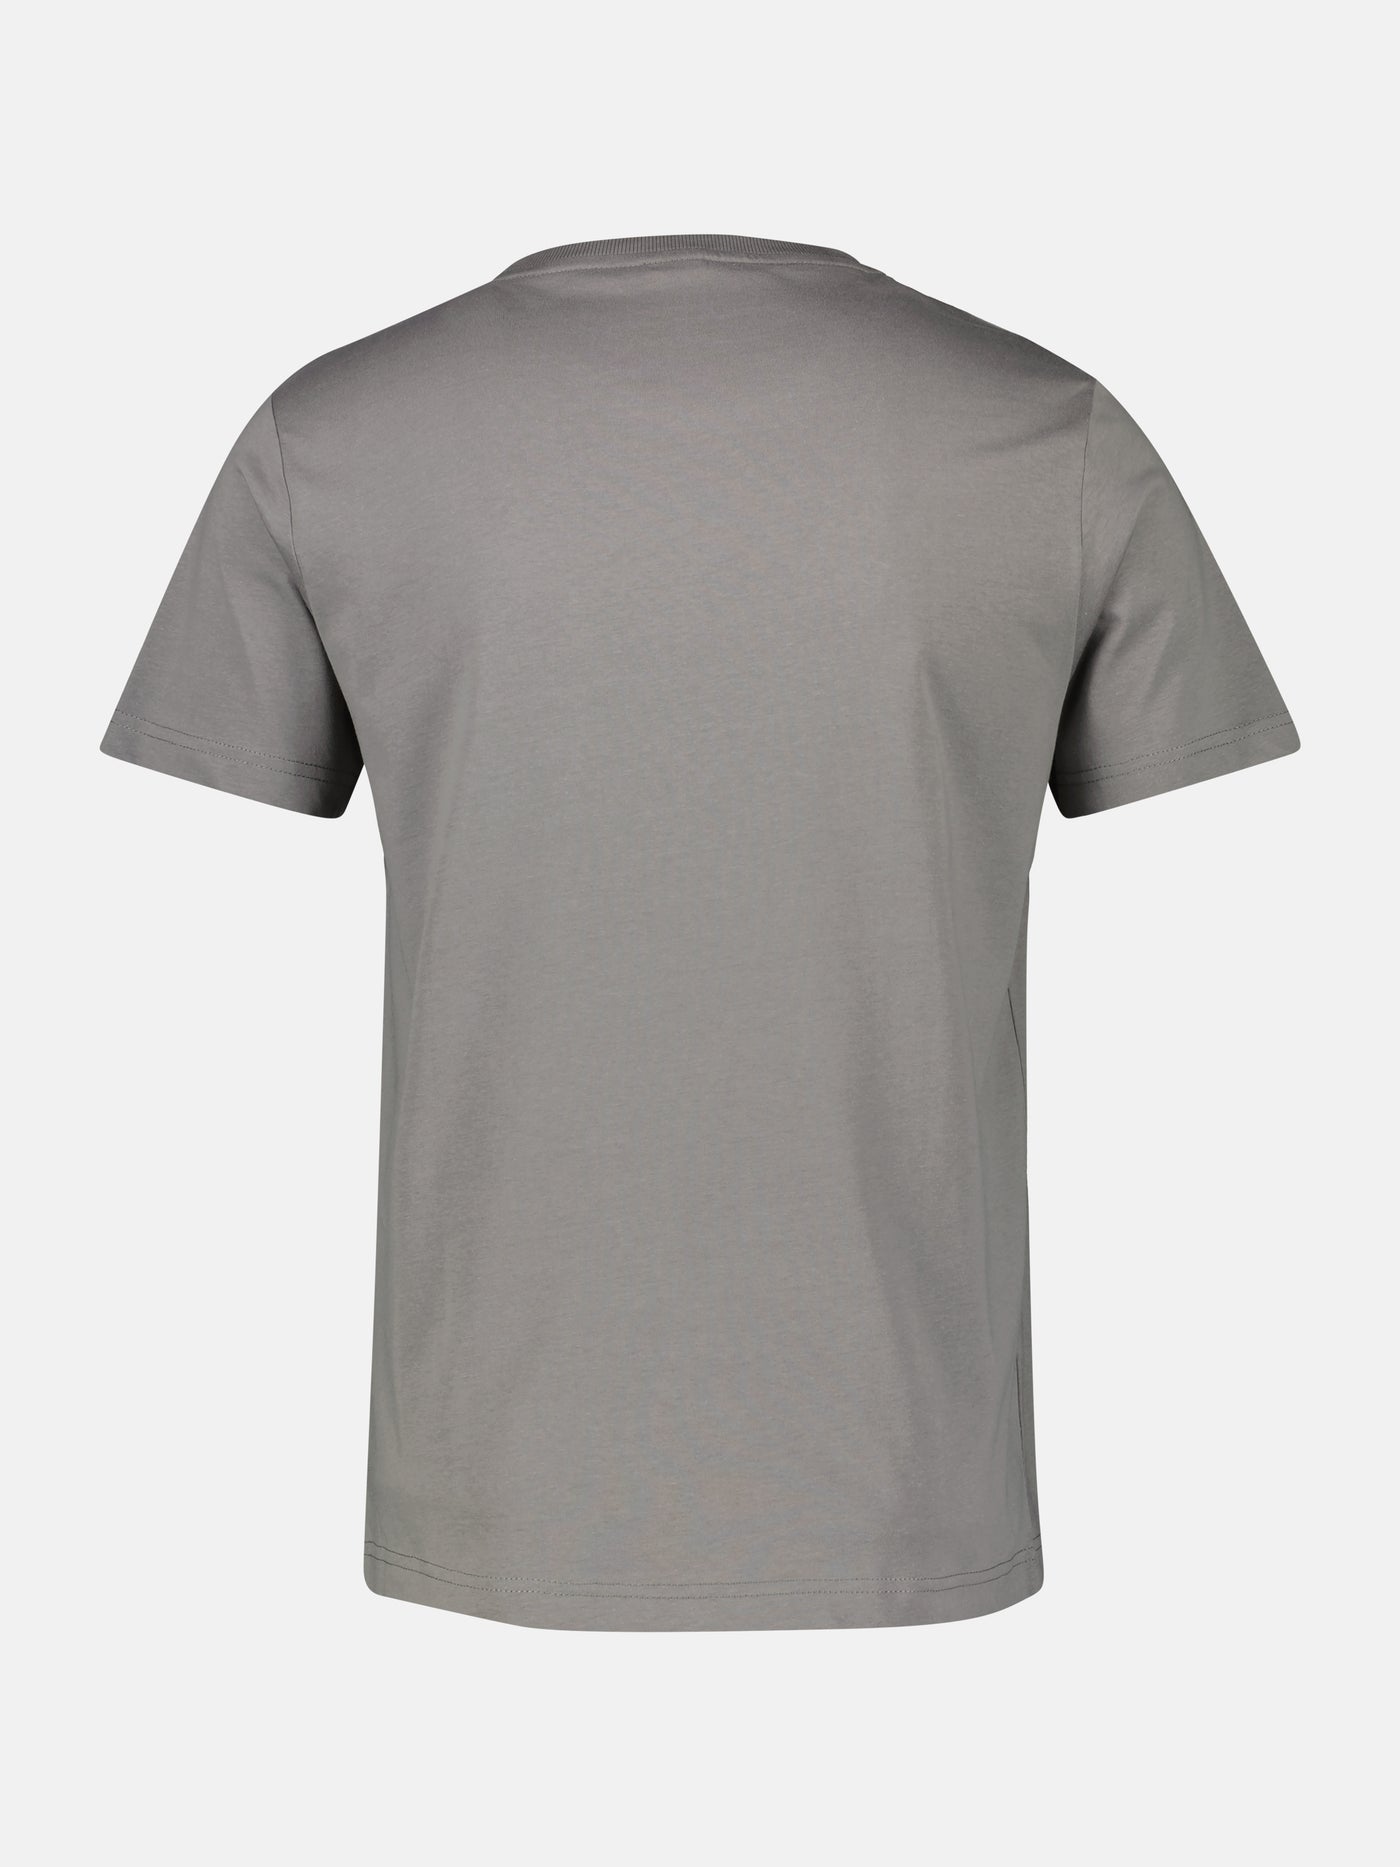 Men's T-shirt with chest print